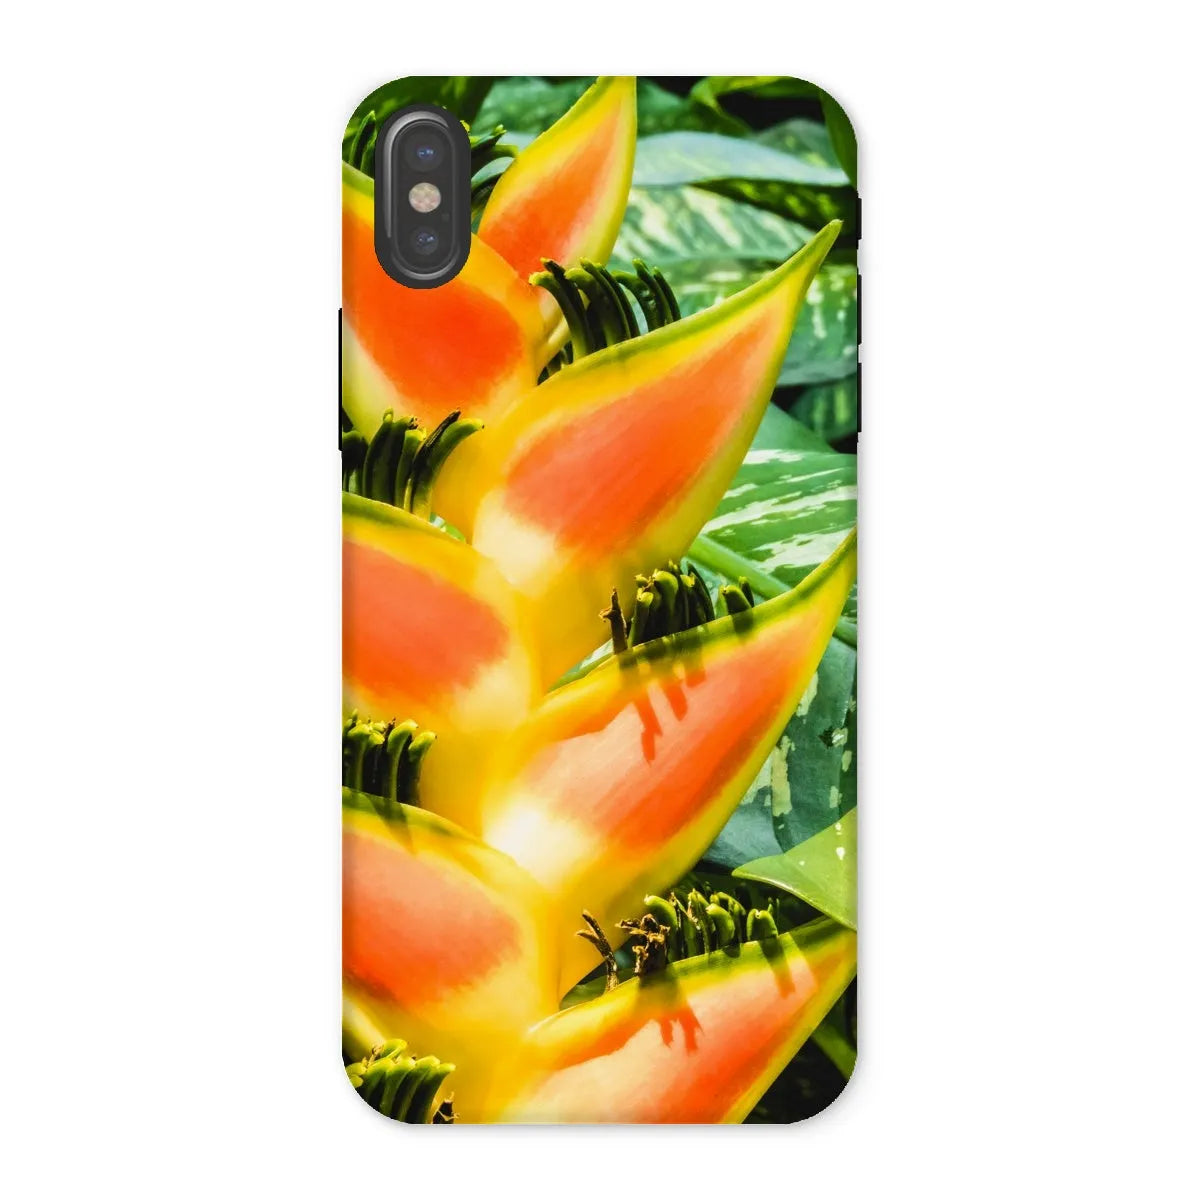 Showstopper Tough Phone Case - Iphone x / Matte - Mobile Phone Cases - Aesthetic Art